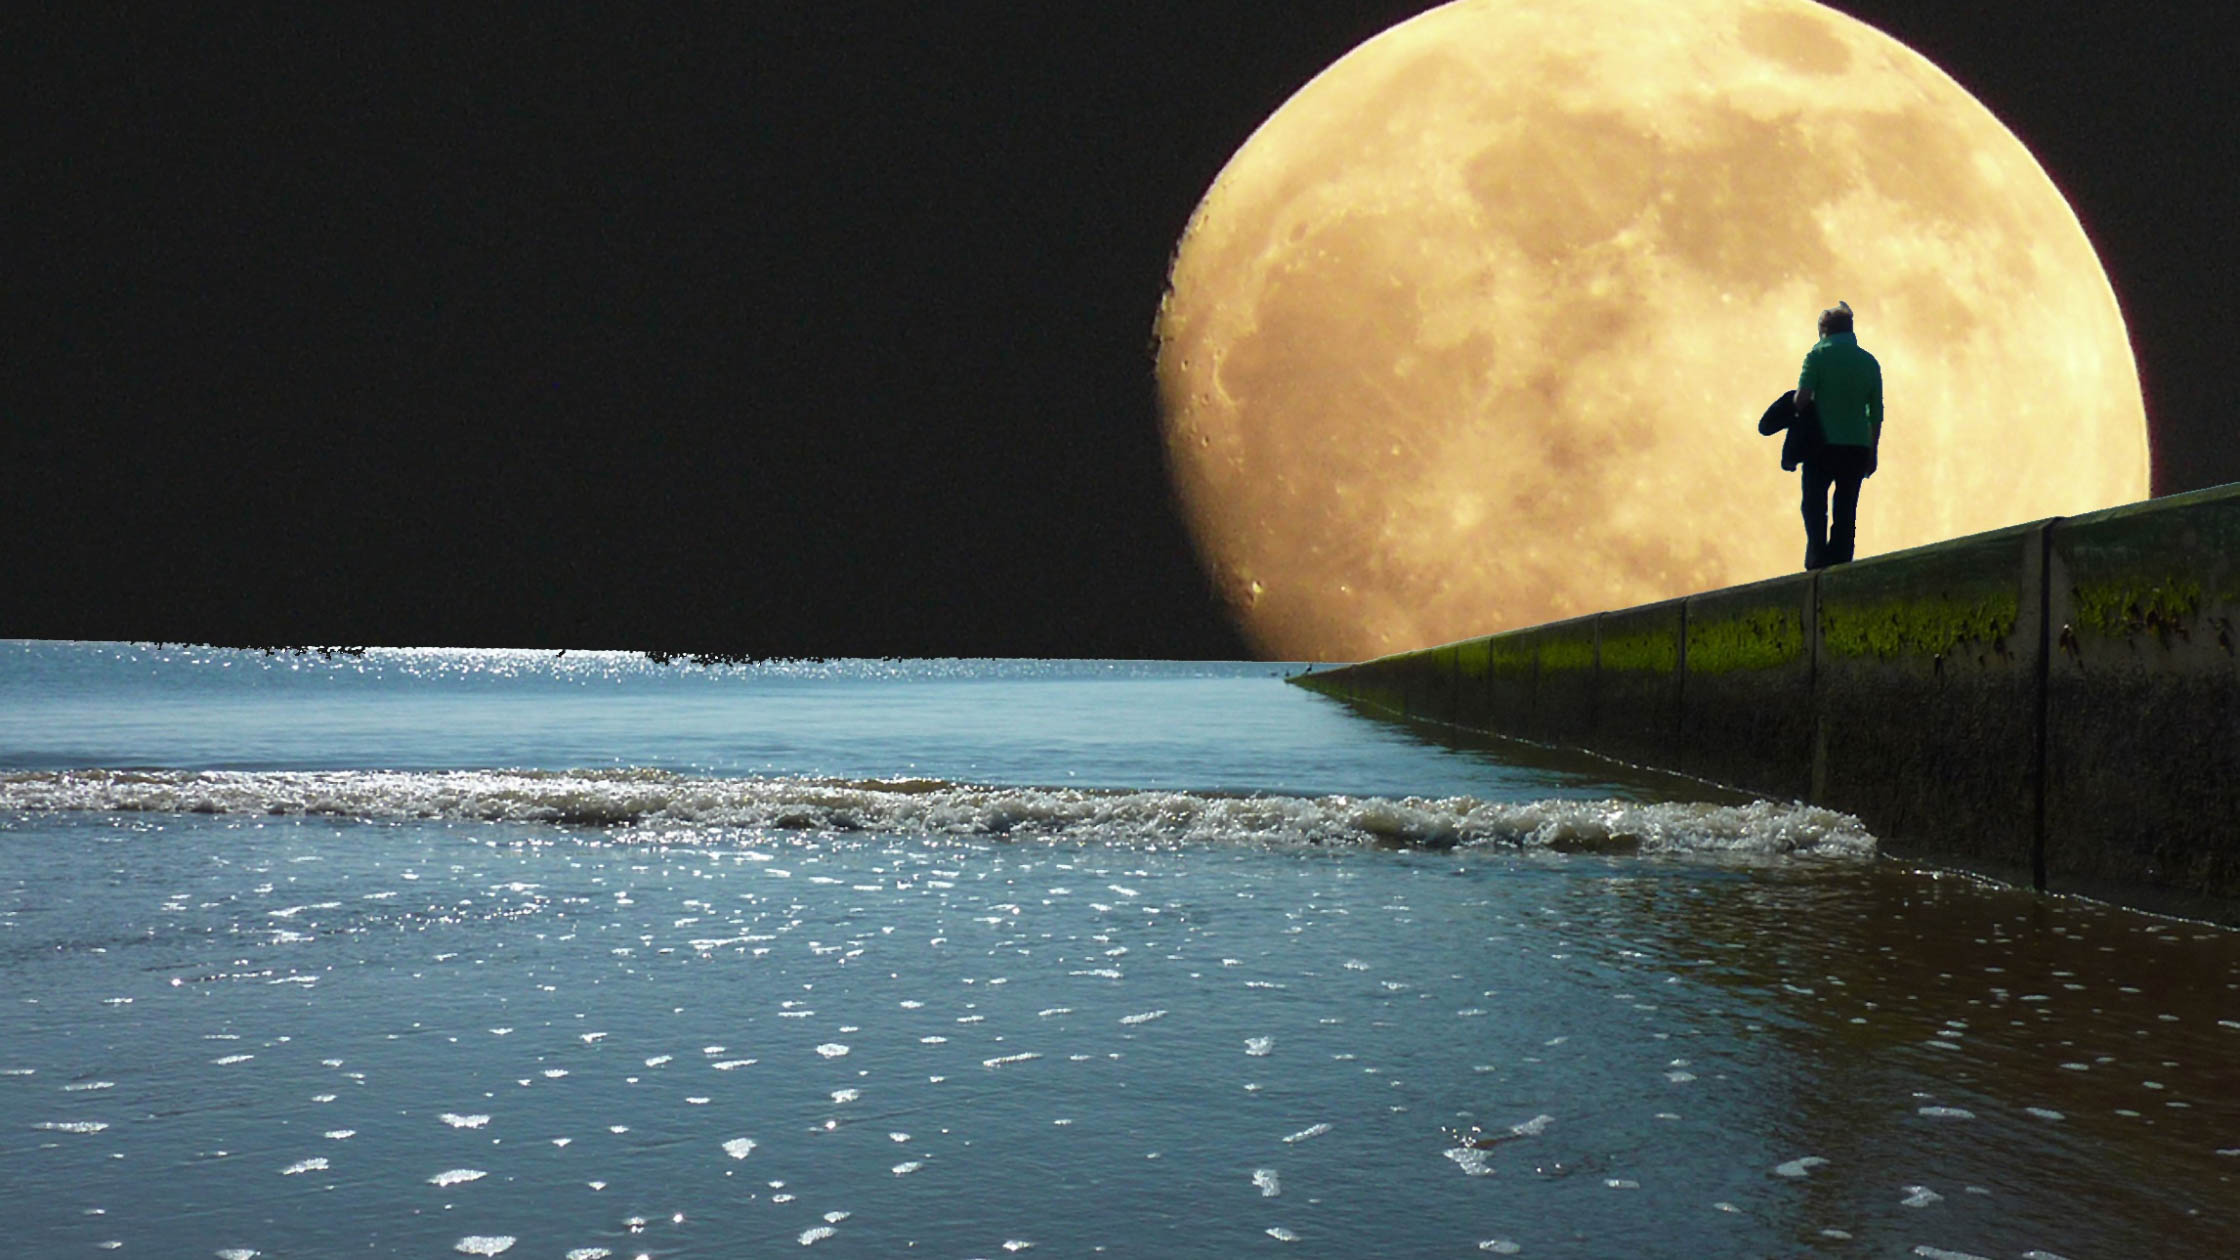 A person walking along a dock with a large moon.